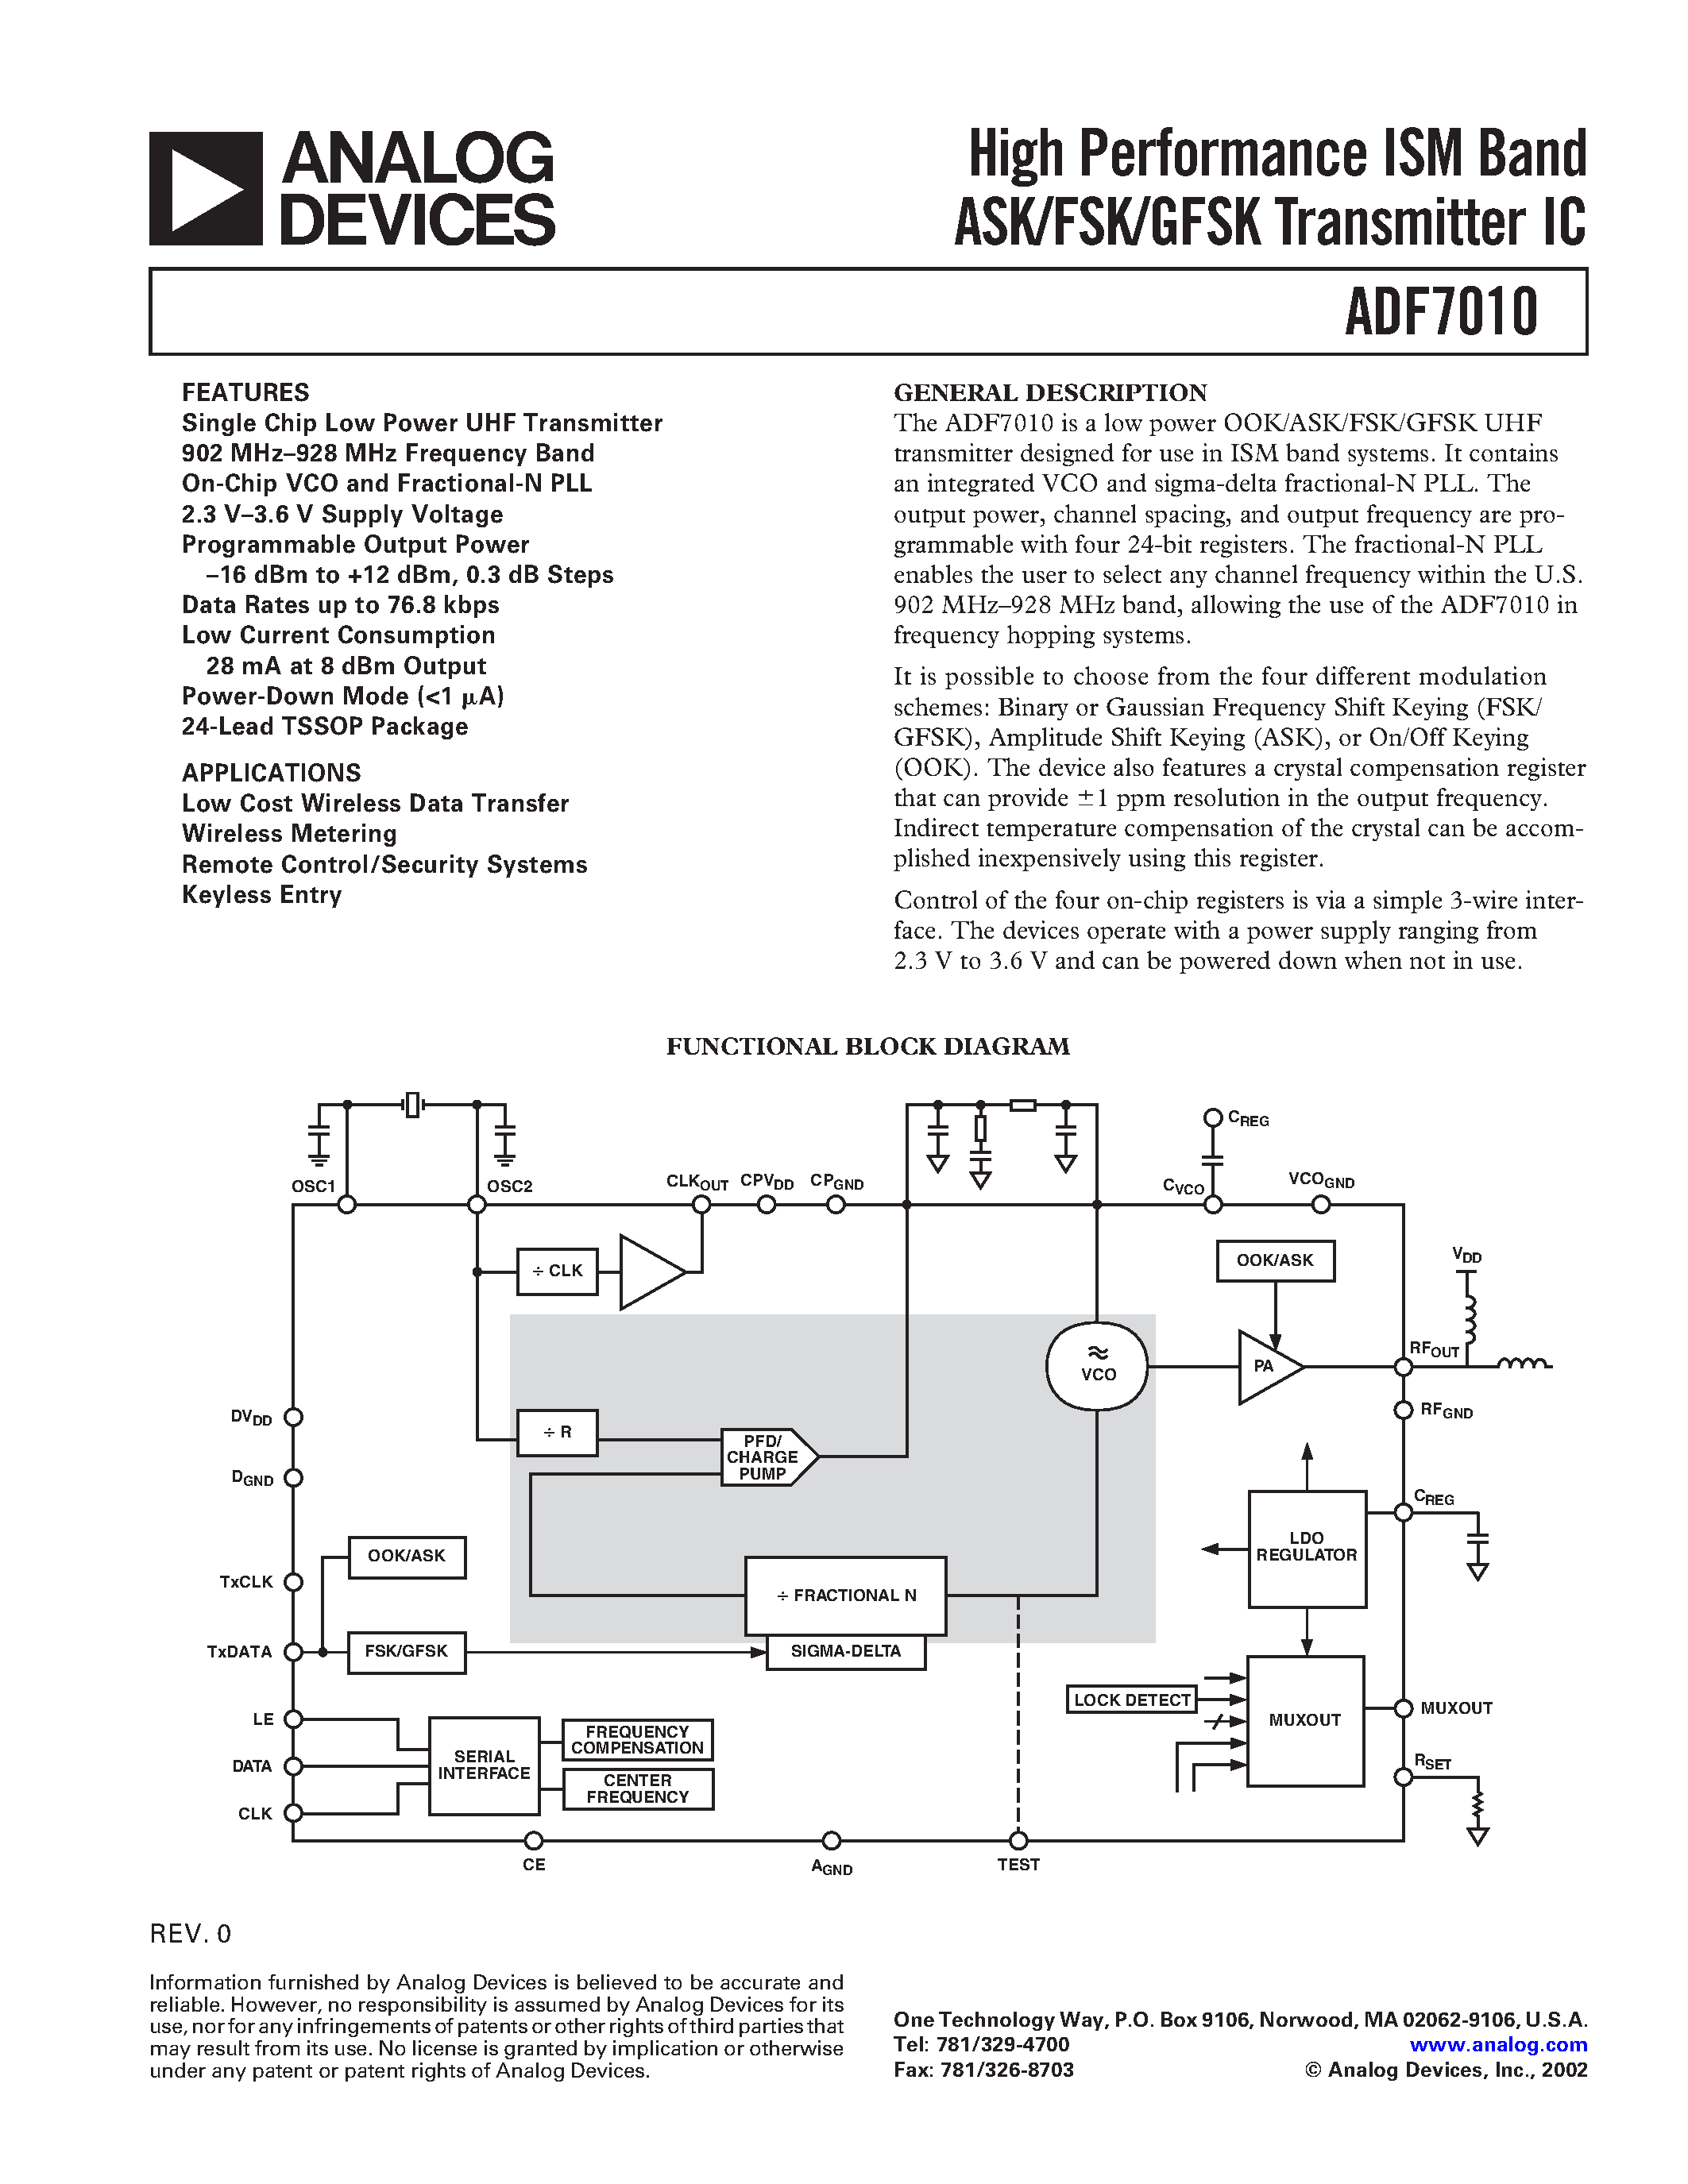 Datasheet ADF7010 - High Performance ISM Band ASK/FSK/GFSK Transmitter IC page 1